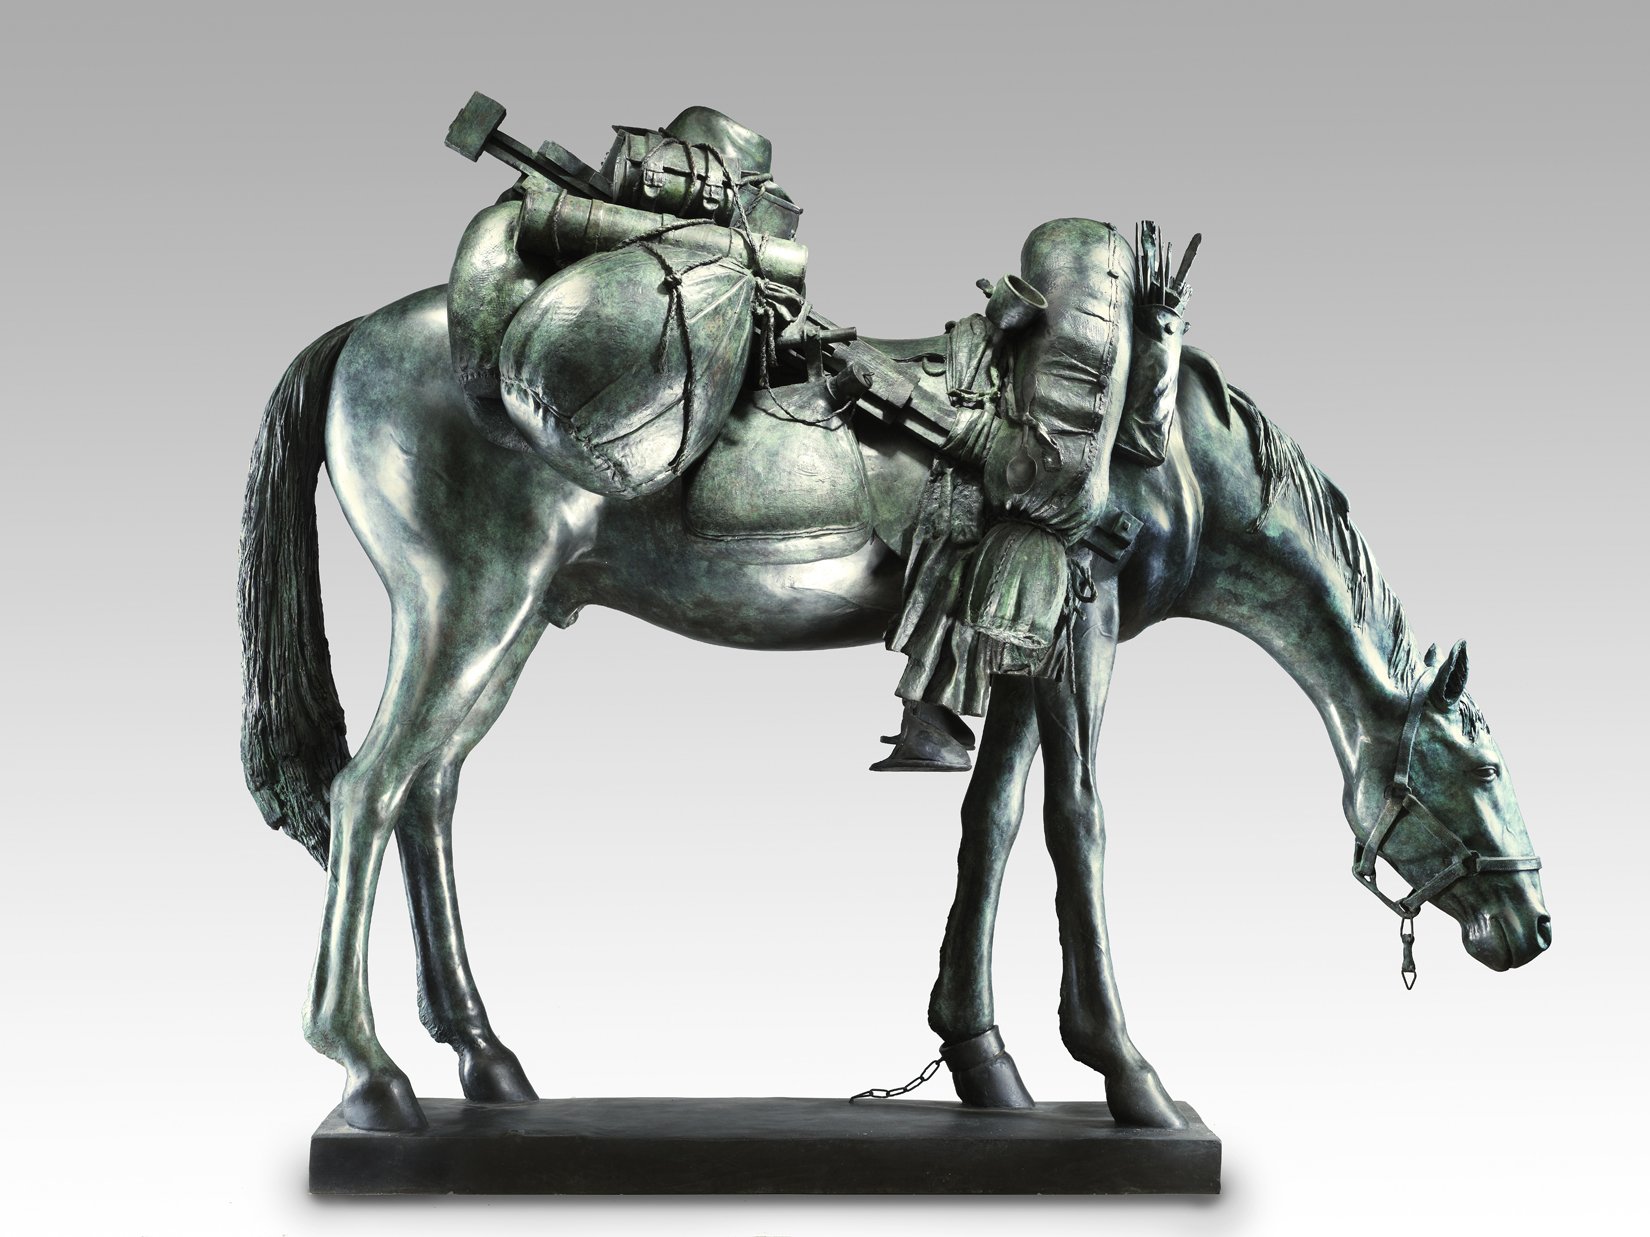 Equine Impedimenta (Tully's baggage) 2019 Bronze Edition of 12, H 121 x W 74 x L 150 cm, base length 100 cm, base width 33cm, weight approx 200 kg 1386.jpg